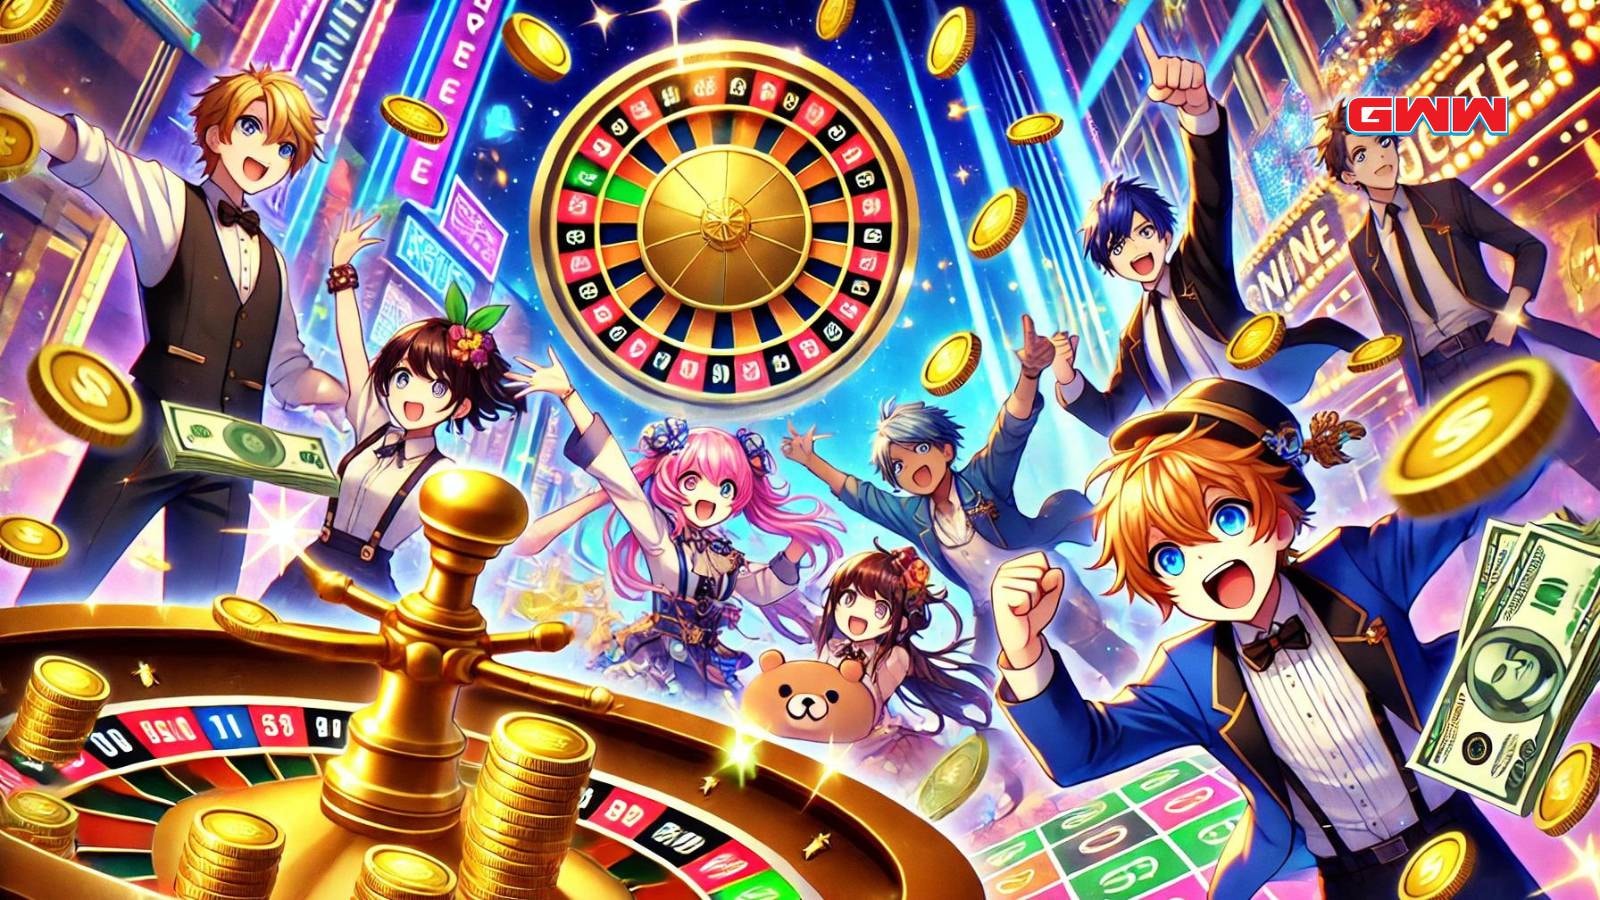 A vibrant anime scene depicting characters winning money in an anime roulette game. 